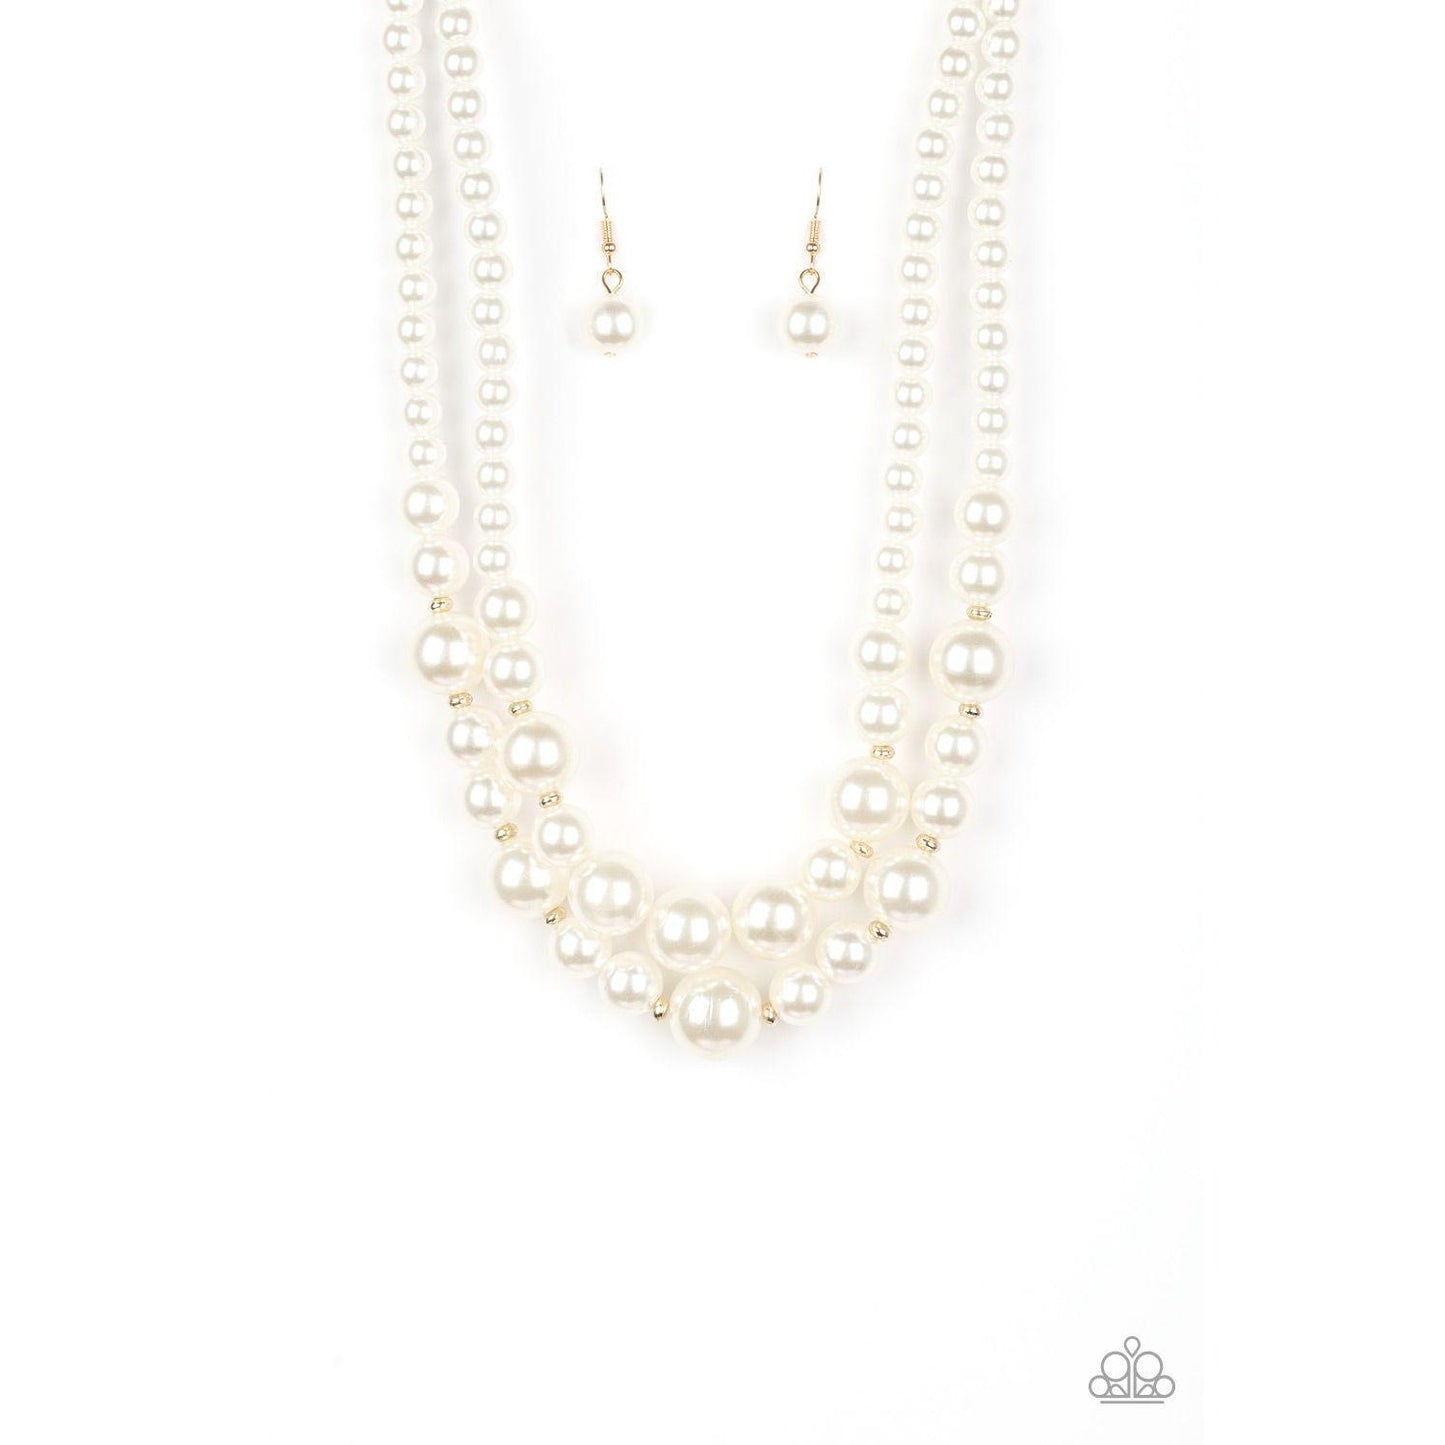 The More The Modest - Gold Necklace 2142